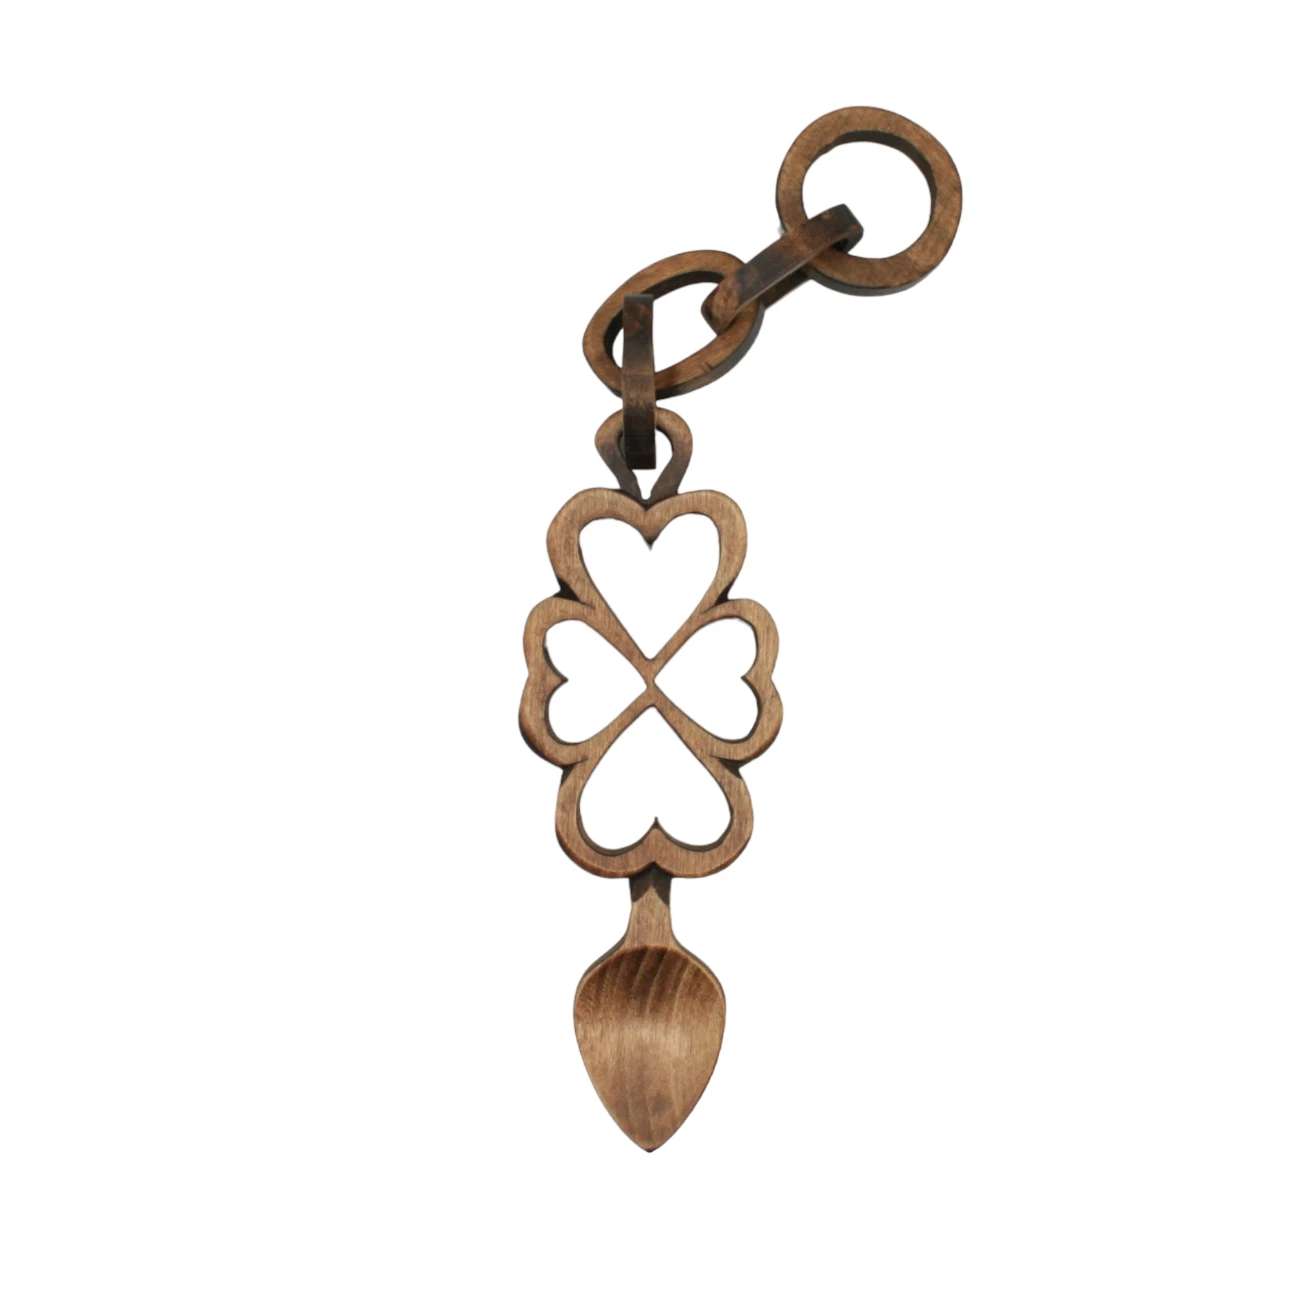 An image of a lovespoon titled 4 Hearts with chain